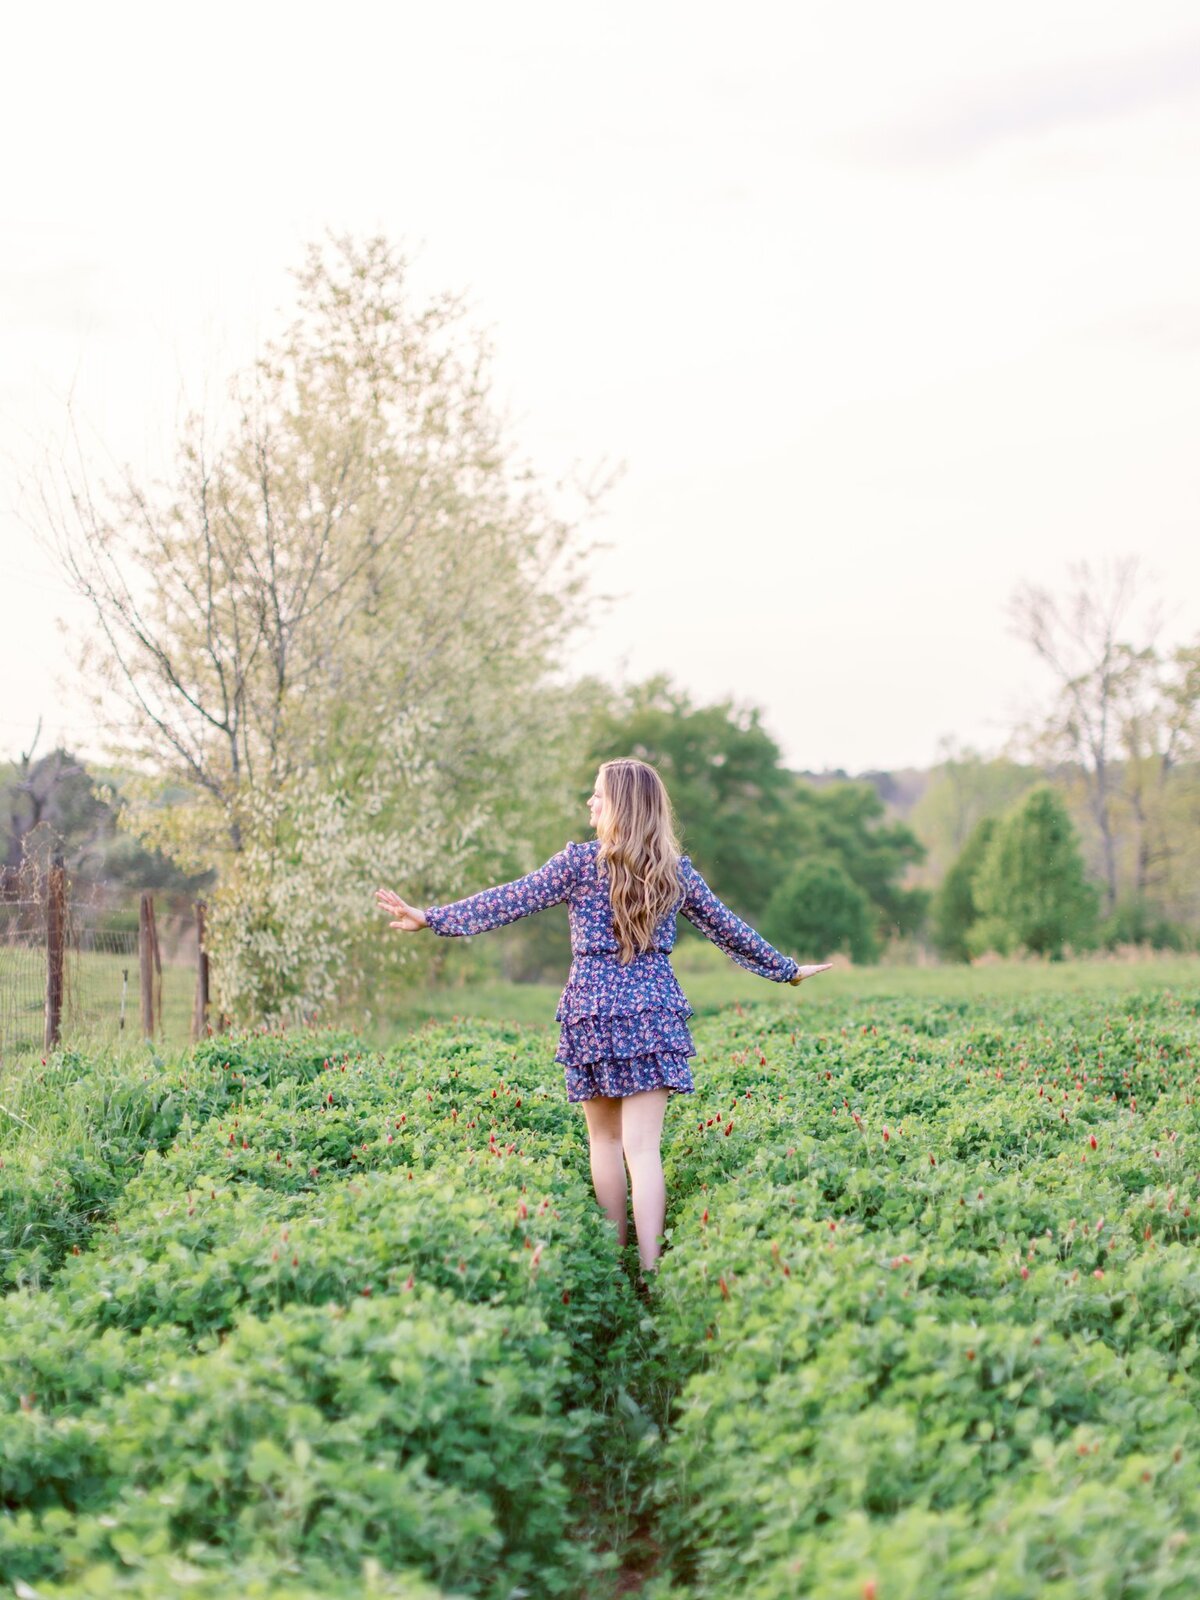 teenage girl walking through clover field with her hands help up embracing the spring day